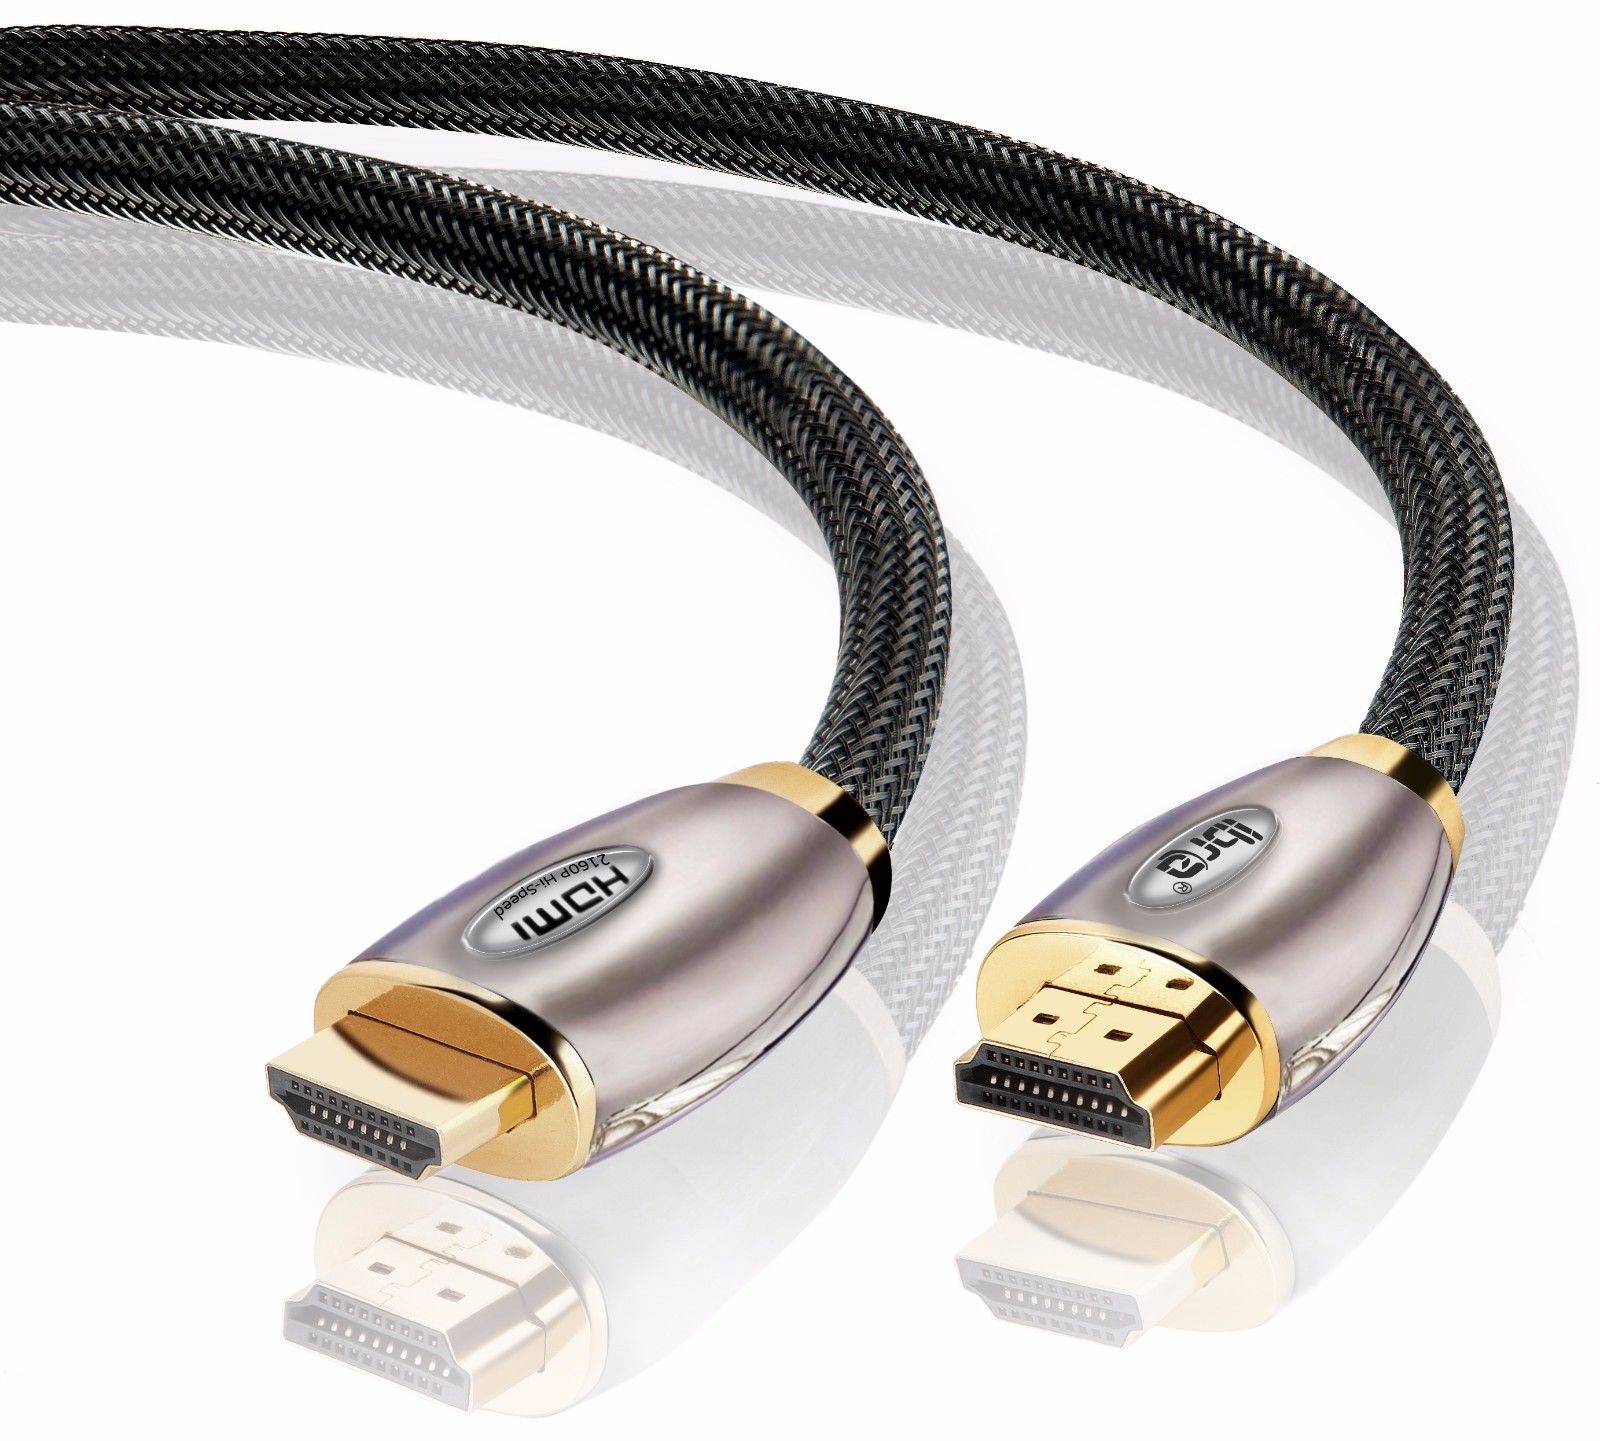 HDMI Cable 5M - 4K UHD HDMI 2.0(4K@60Hz) Ready -18Gbps-28AWG Braided Cord -Gold Plated Connectors -Ethernet,Audio Return -Video 4K 2160p,HD 1080p,3D -Xbox PlayStation PS3 PS4 PC Apple TV -IBRA RED